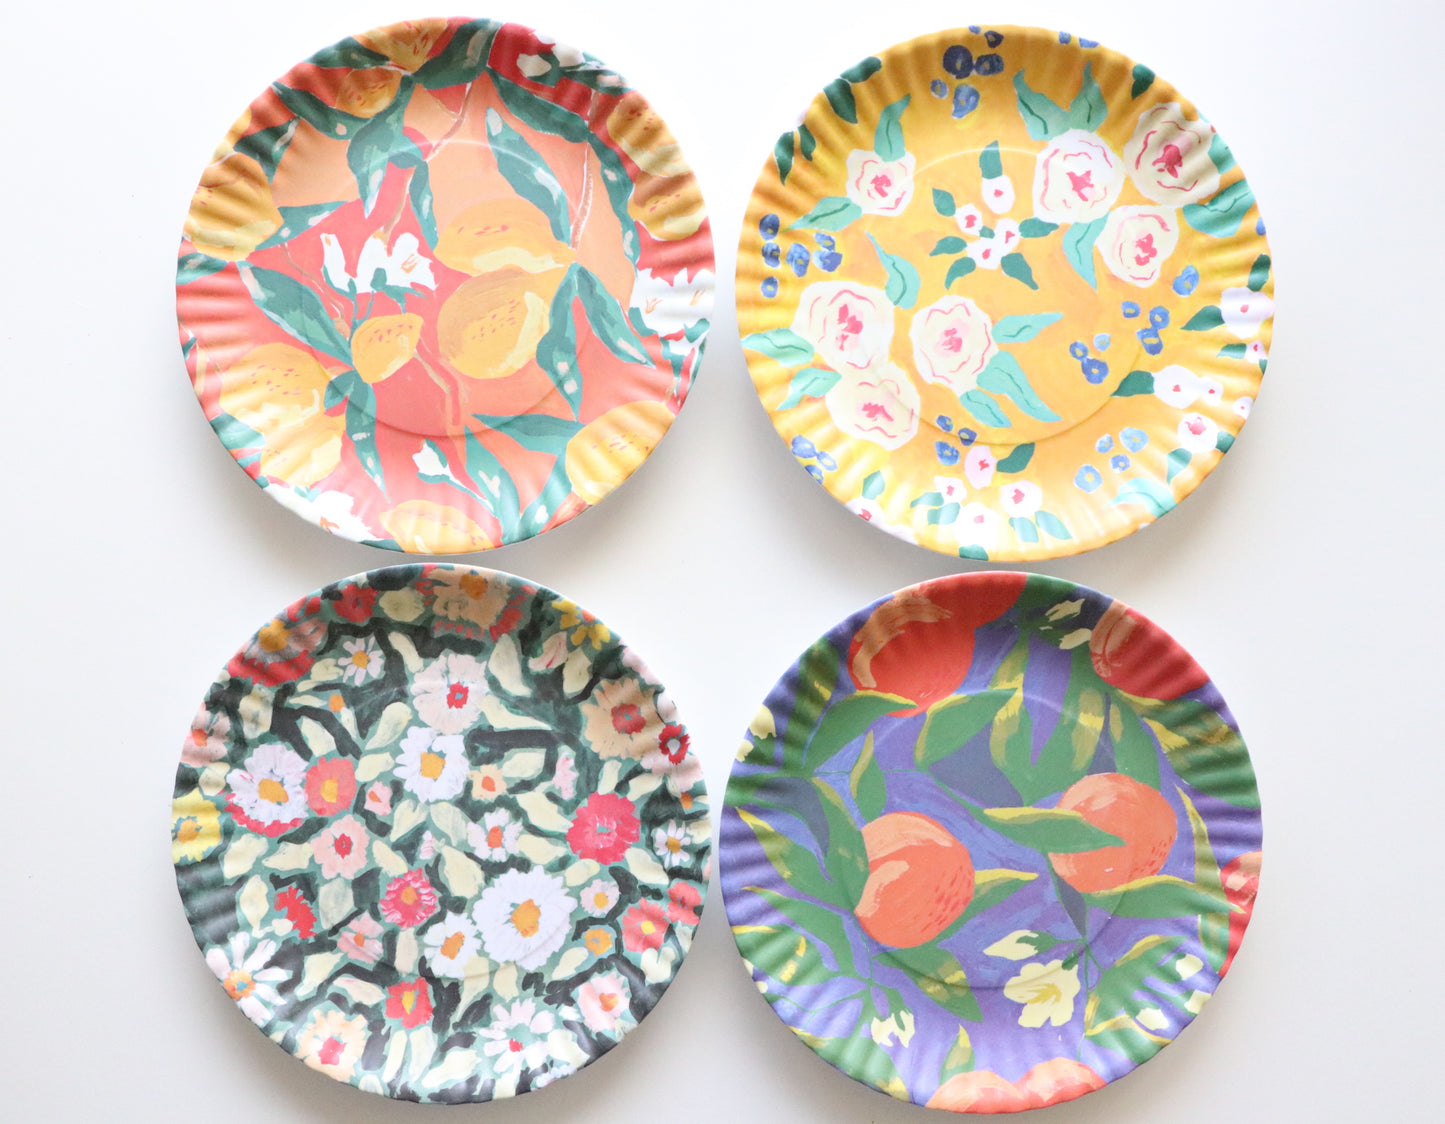 Fruit and Floral "Paper" Plates